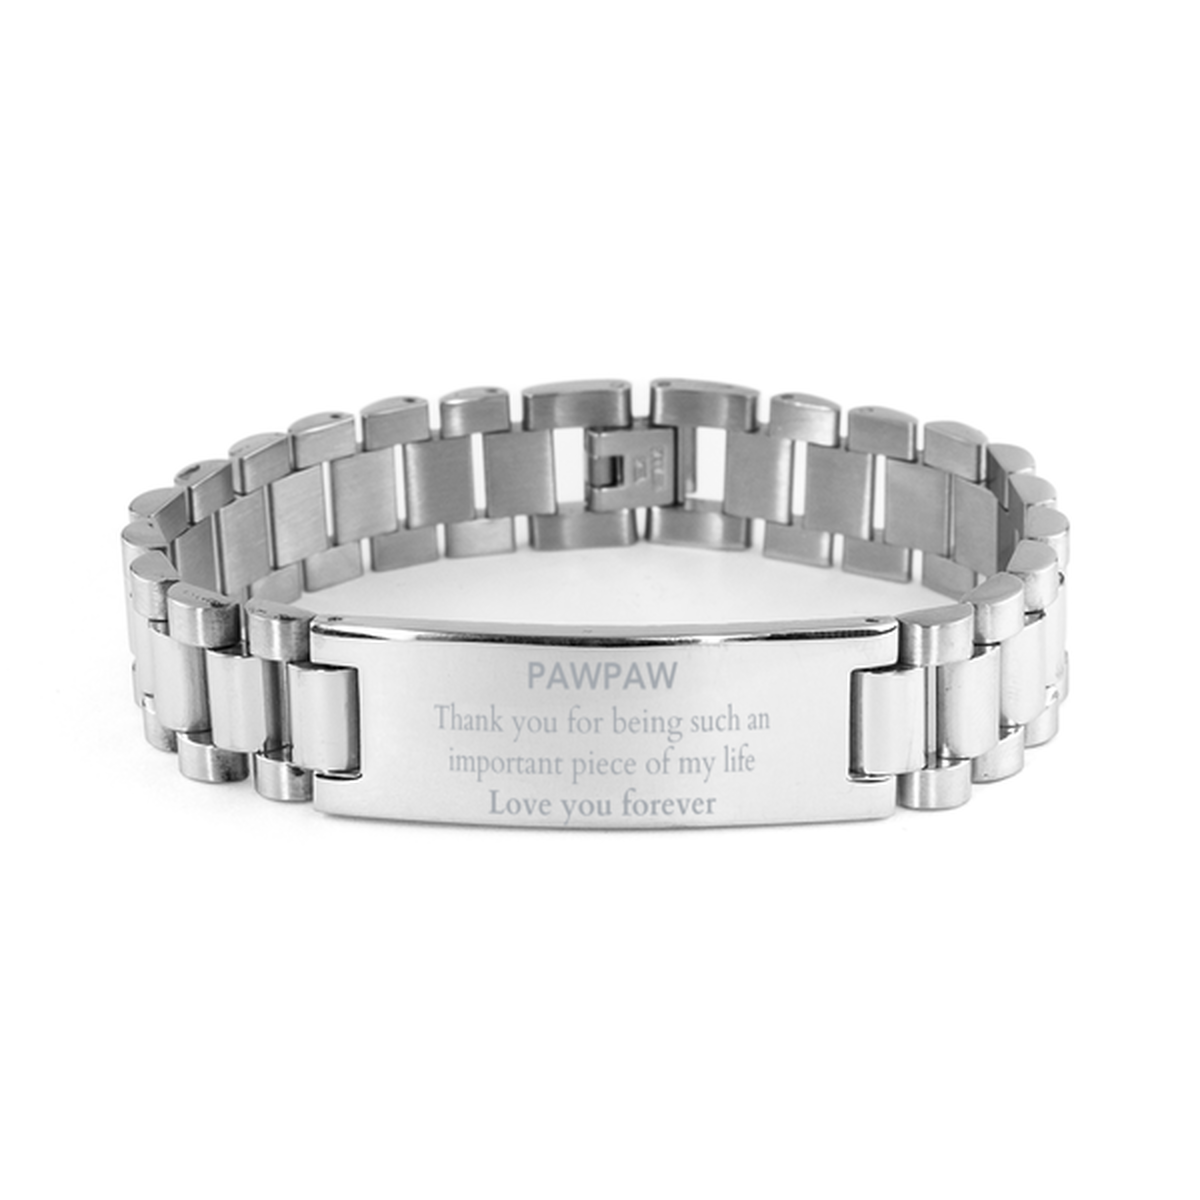 Appropriate Pawpaw Ladder Stainless Steel Bracelet Epic Birthday Gifts for Pawpaw Thank you for being such an important piece of my life Pawpaw Christmas Mothers Fathers Day